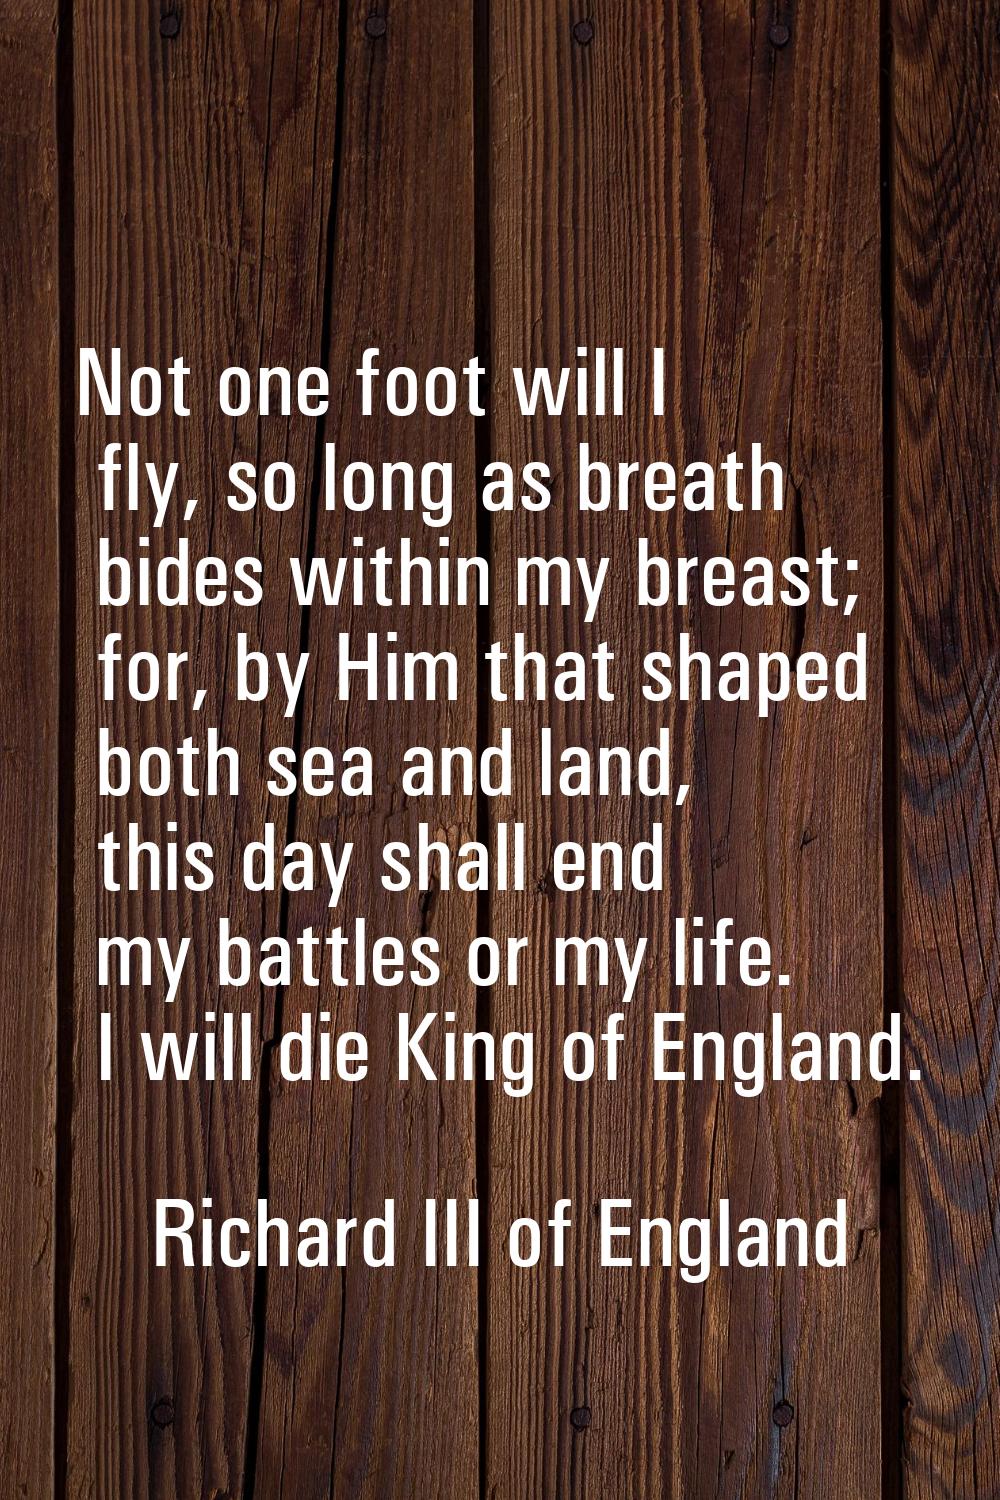 Not one foot will I fly, so long as breath bides within my breast; for, by Him that shaped both sea